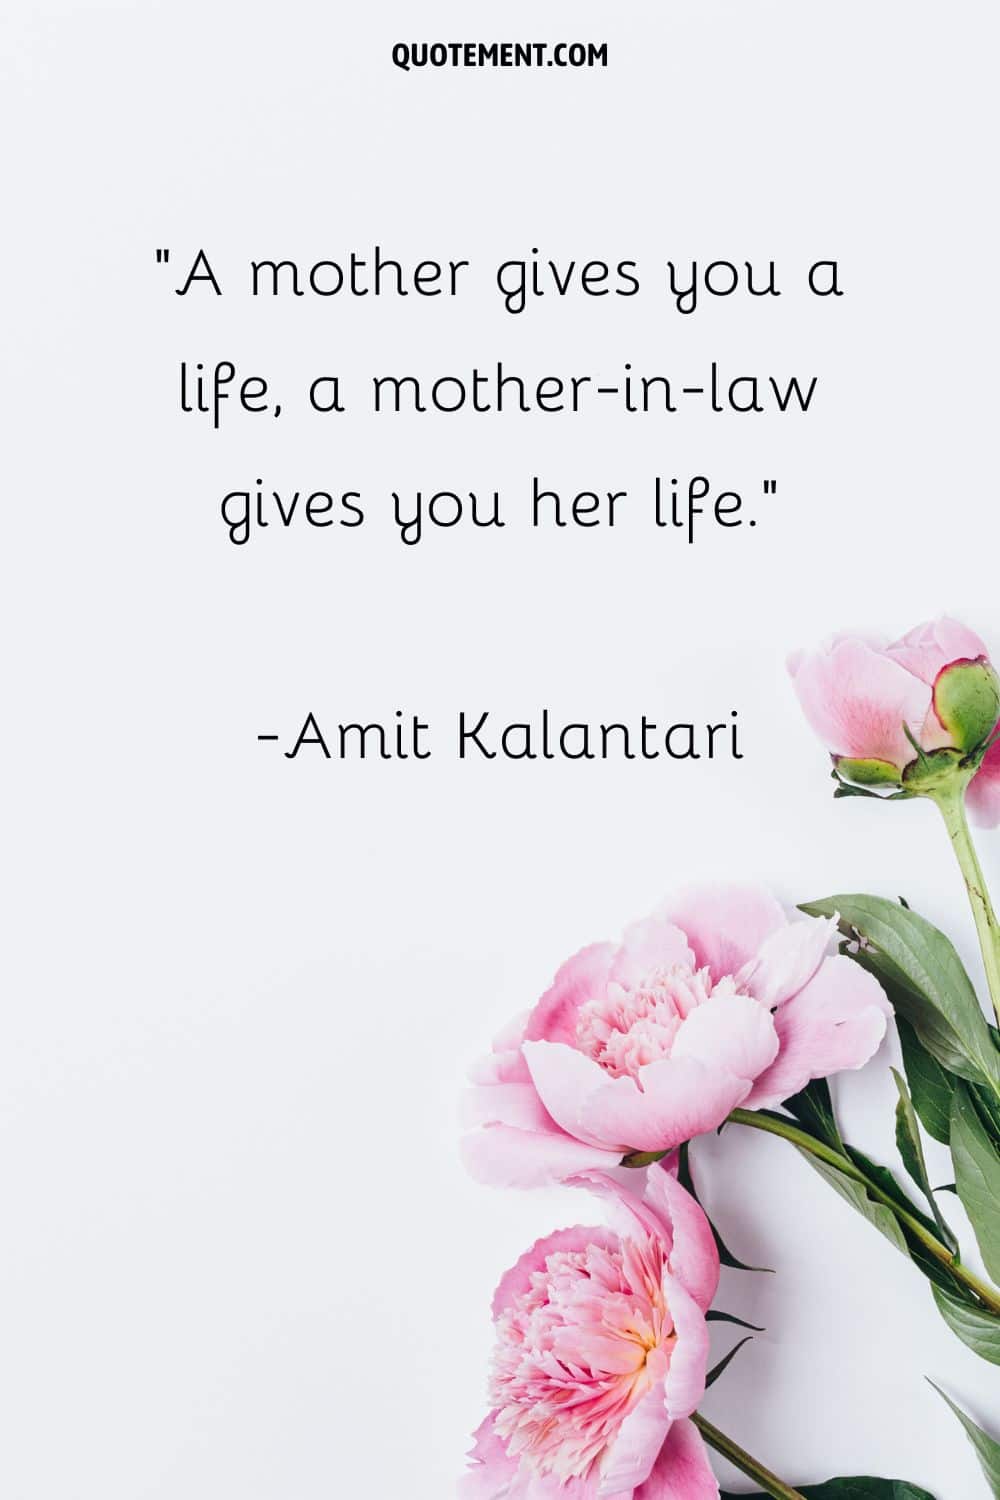 One of the best mother in law quotes.